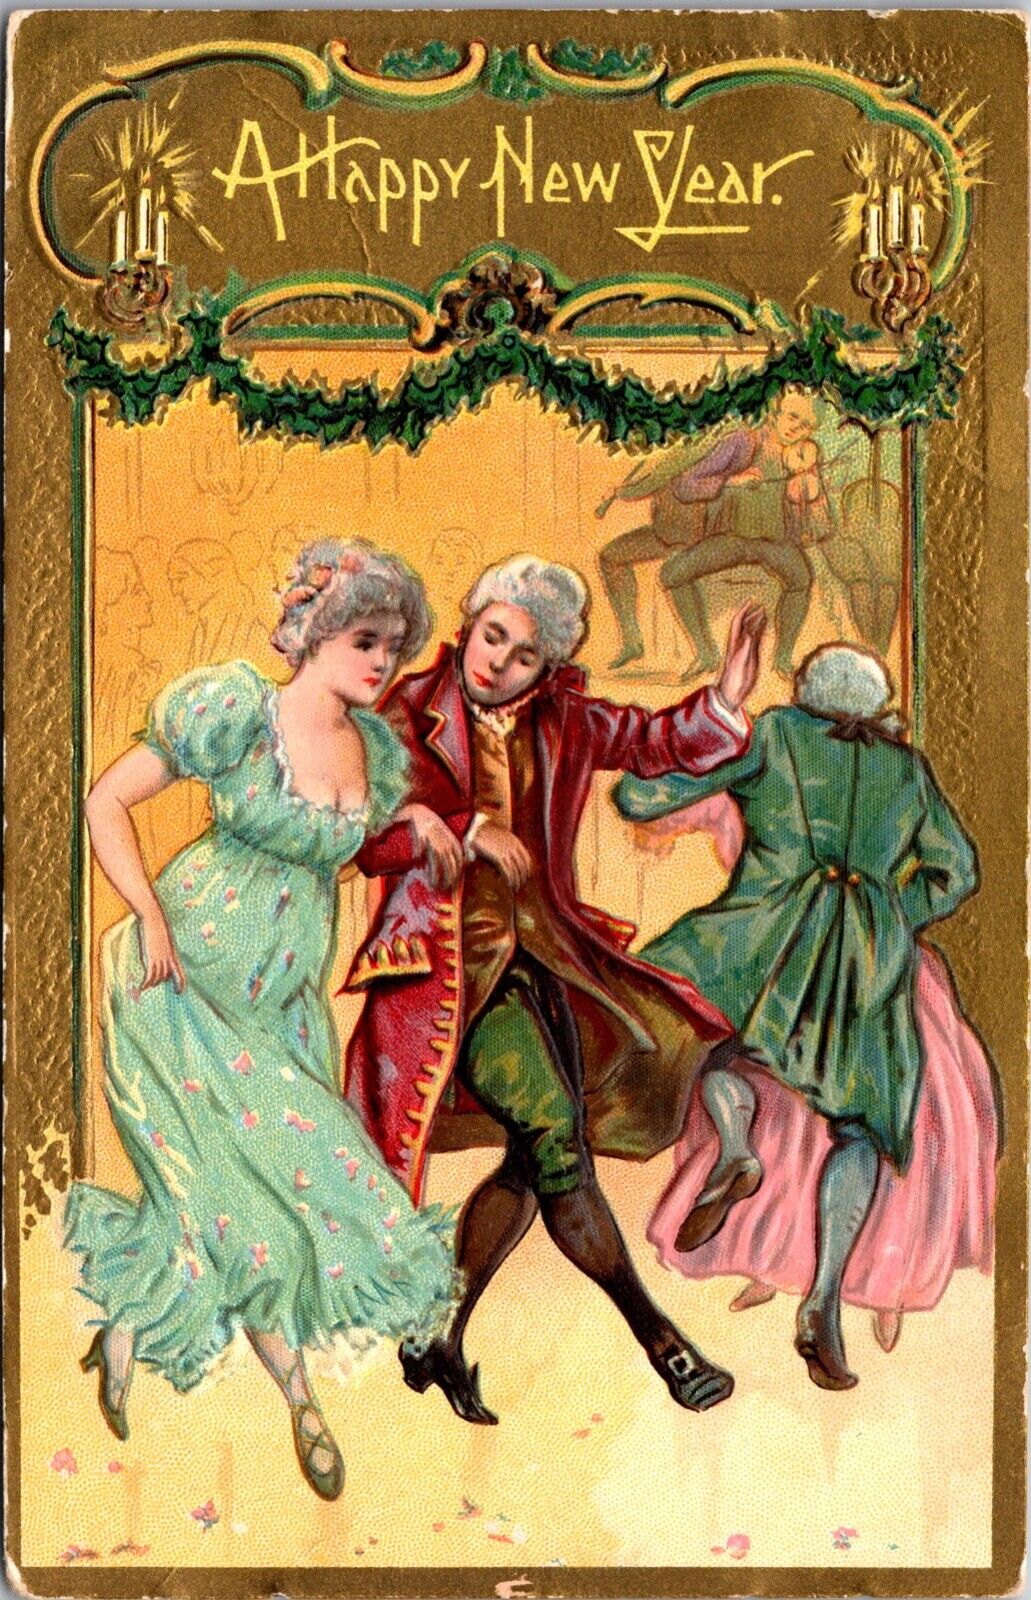 New Year Postcard Couples Dancing at Party with Musicians